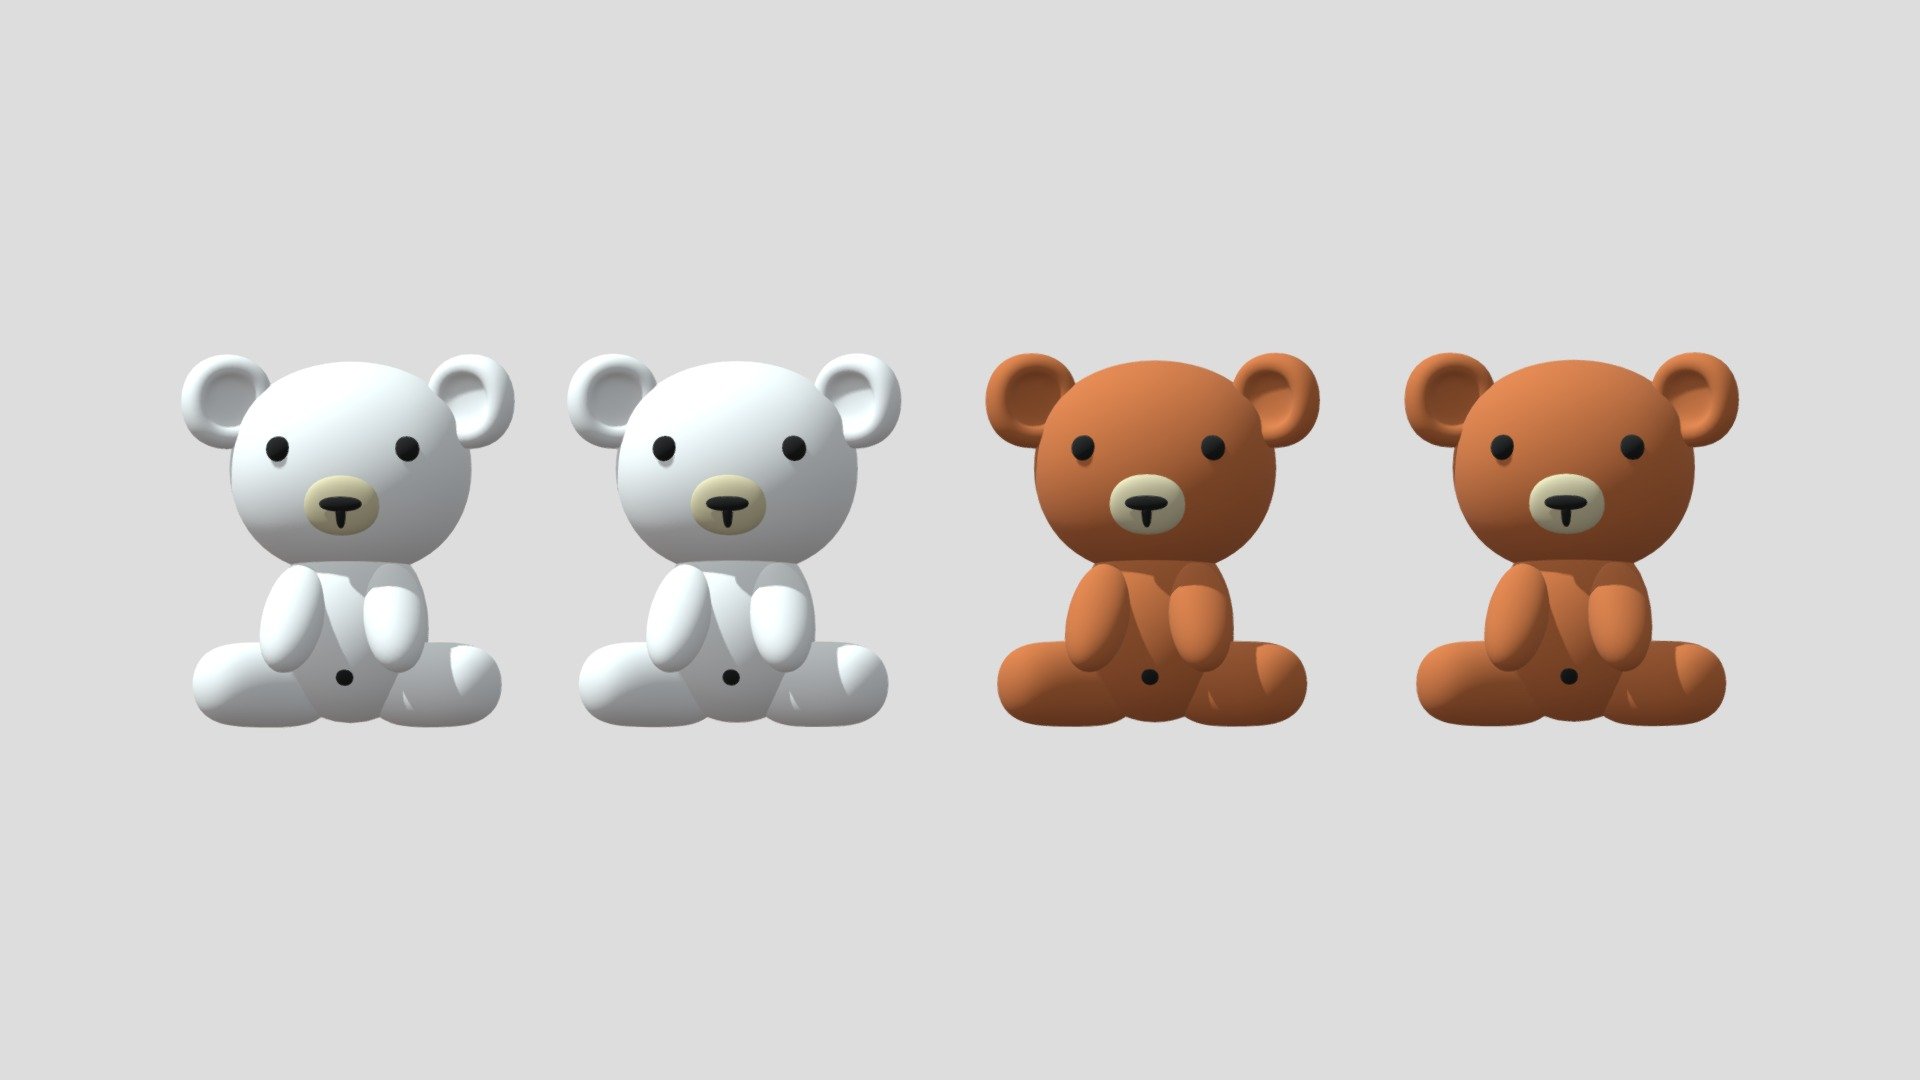 -Cartoon Cute Bear.

-This product contains 56 objects.

-Mid Poly : Verts : 8,380 Faces : 8,448.

-High Poly : Verts : 24,508 Faces : 24,567.

-Materials and objects have the correct names.

-This product was created in Blender 2.935.

-Formats: blend, fbx, obj, c4d, dae, abc, stl, glb, unity.

-We hope you enjoy this model.

-Thank you 3d model